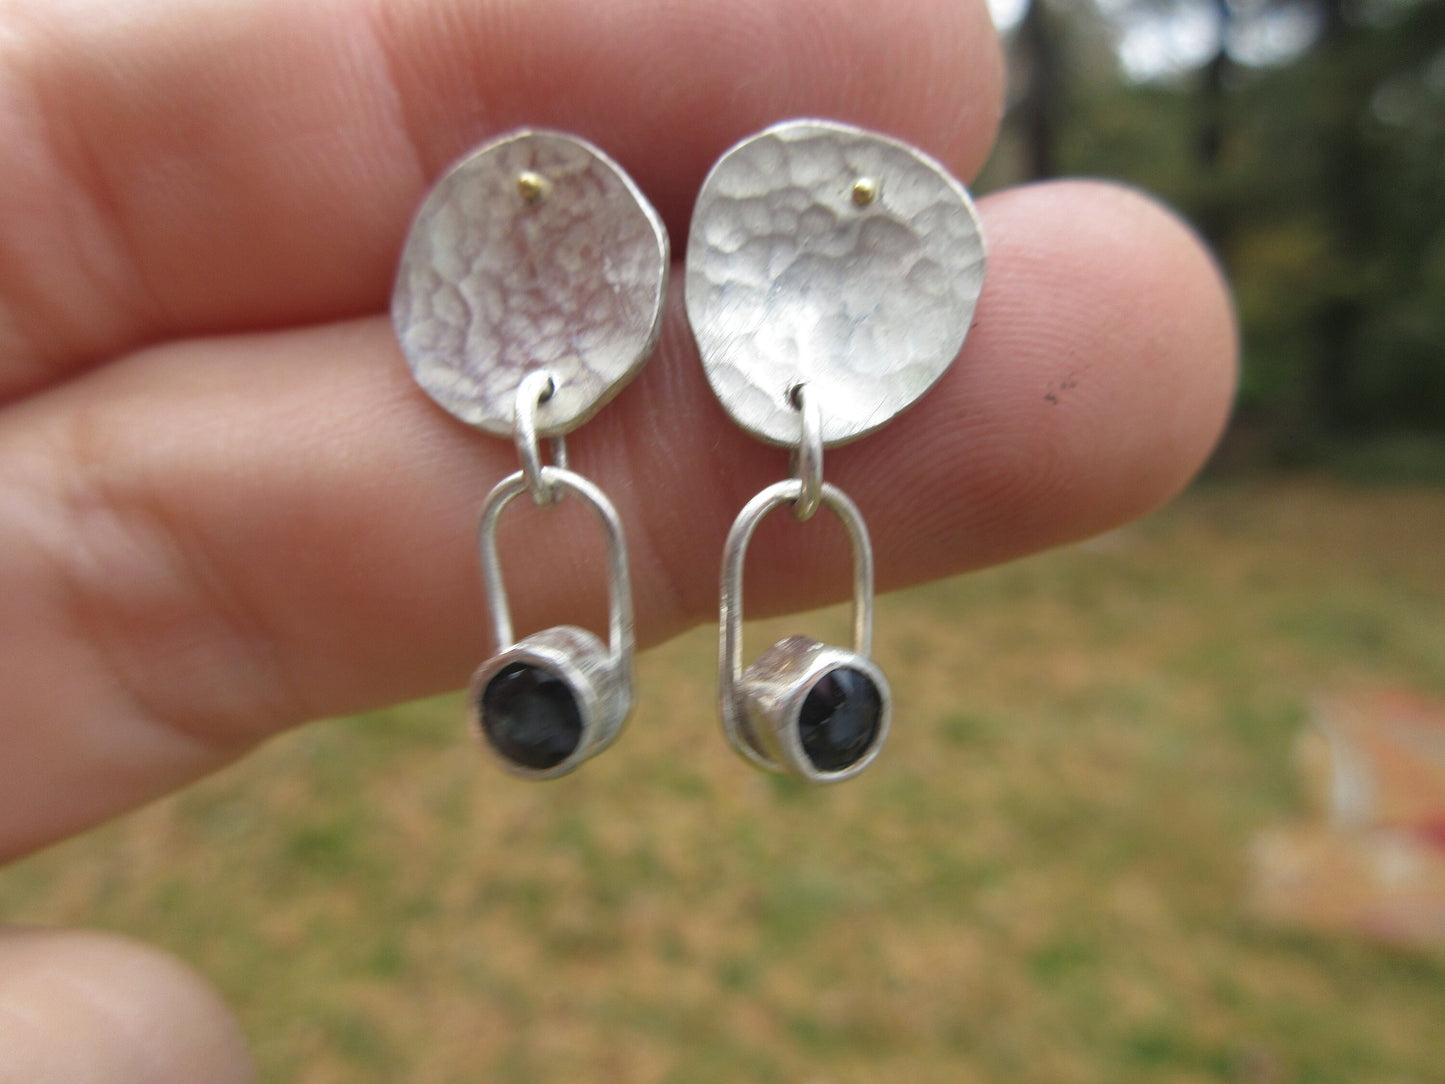 Moonlight sapphire earrings in argentium sterling silver and 24 karat gold